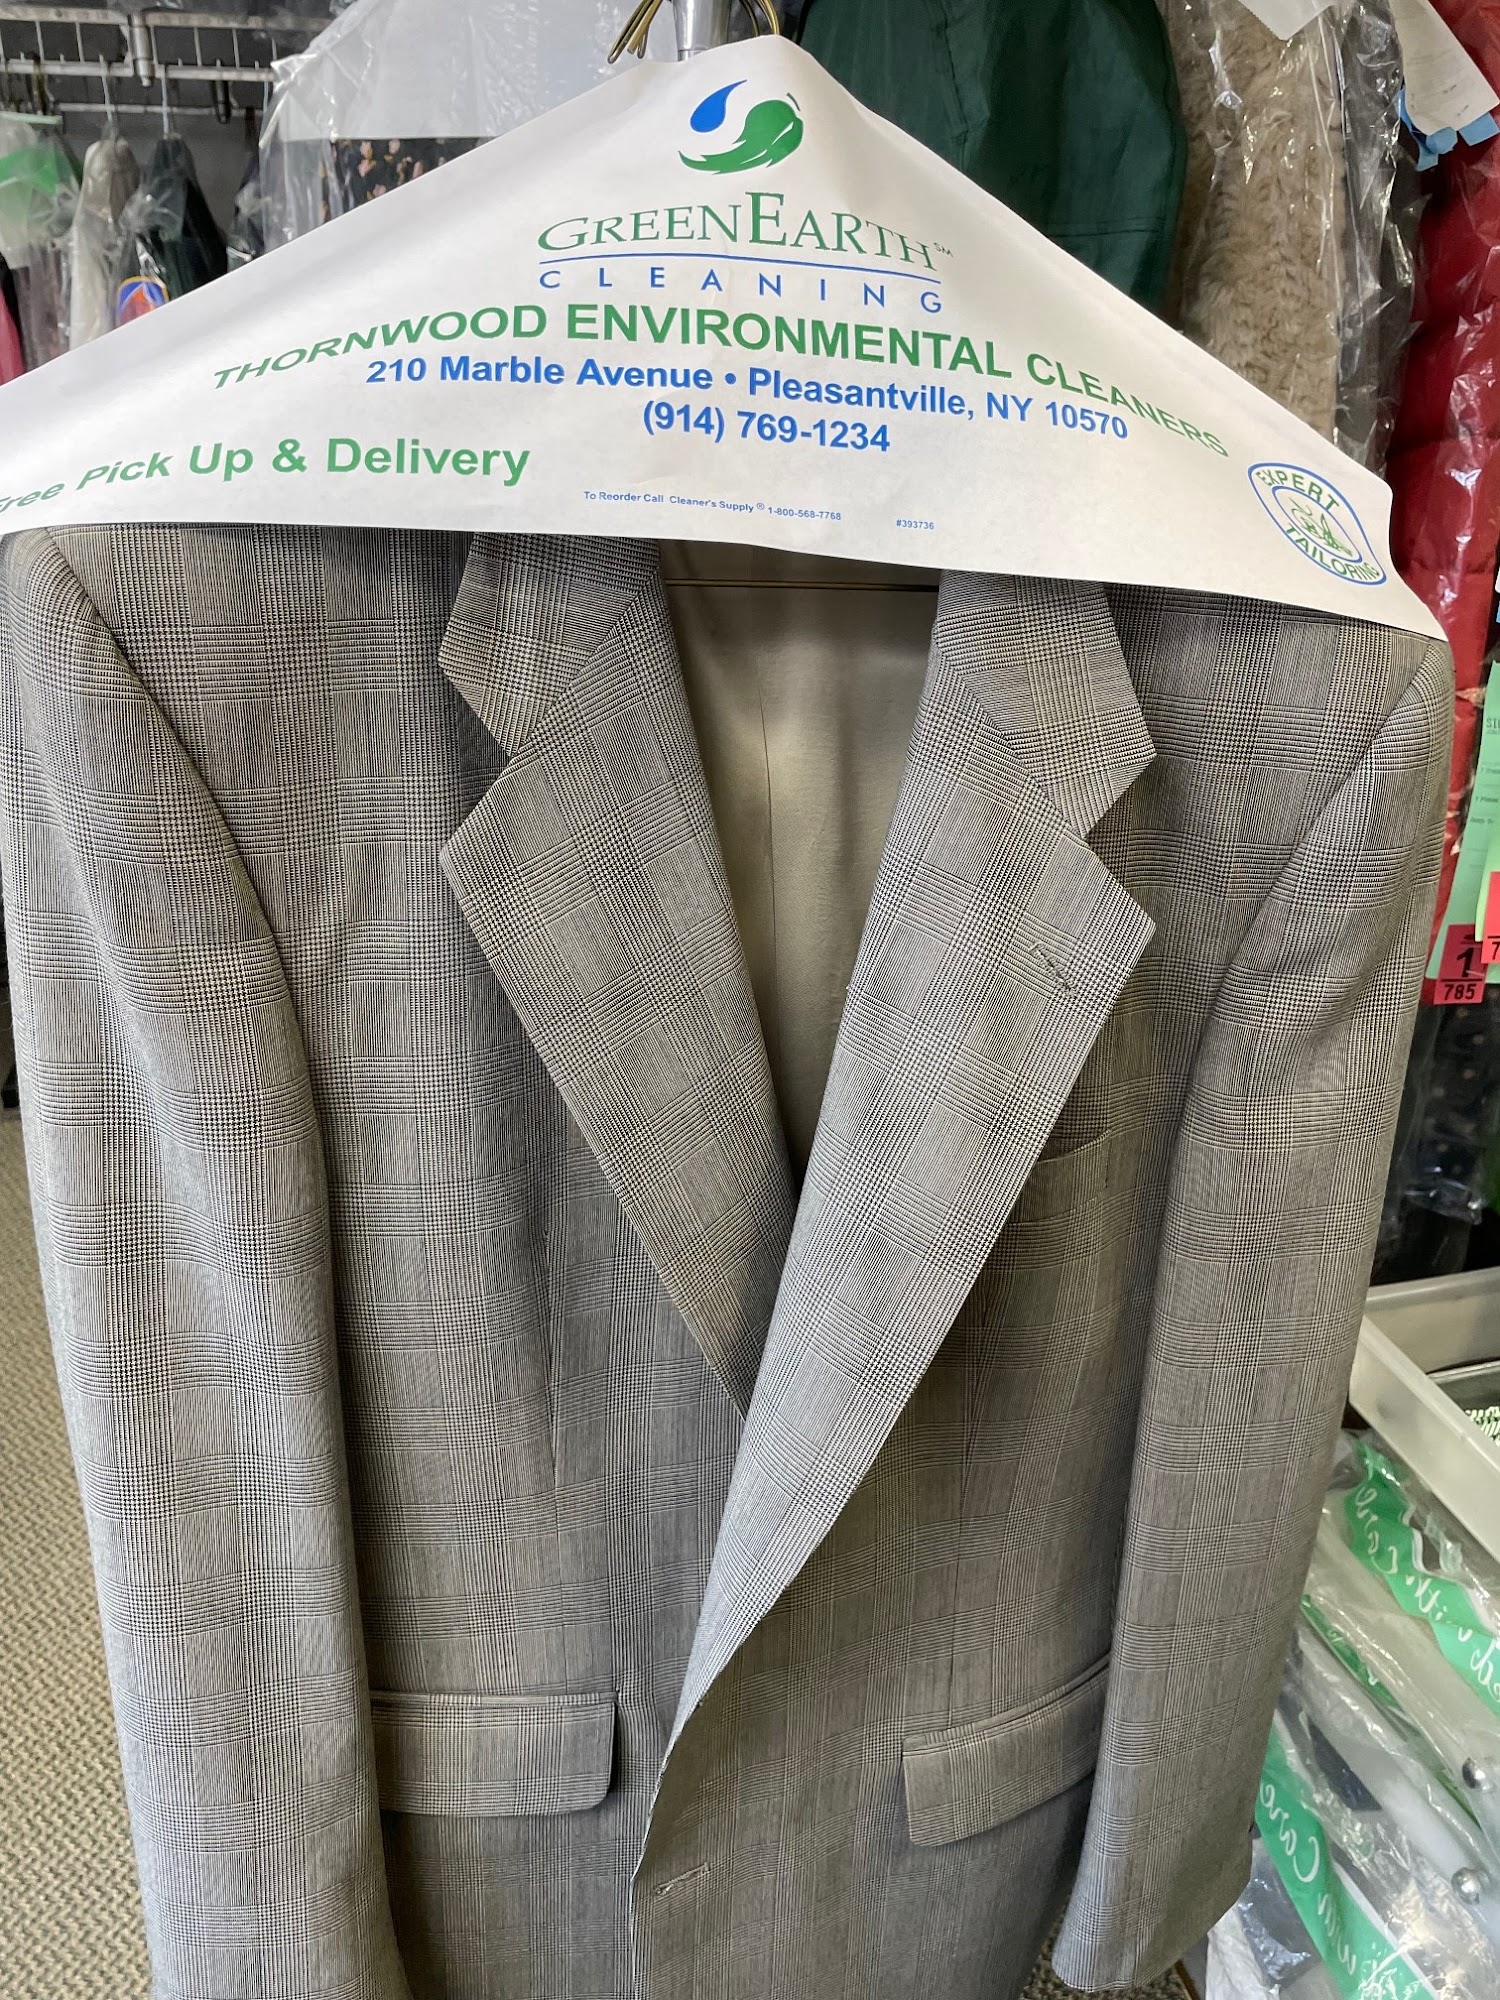 Thornwood Cleaners 210 Marble Ave #1, Pleasantville New York 10570